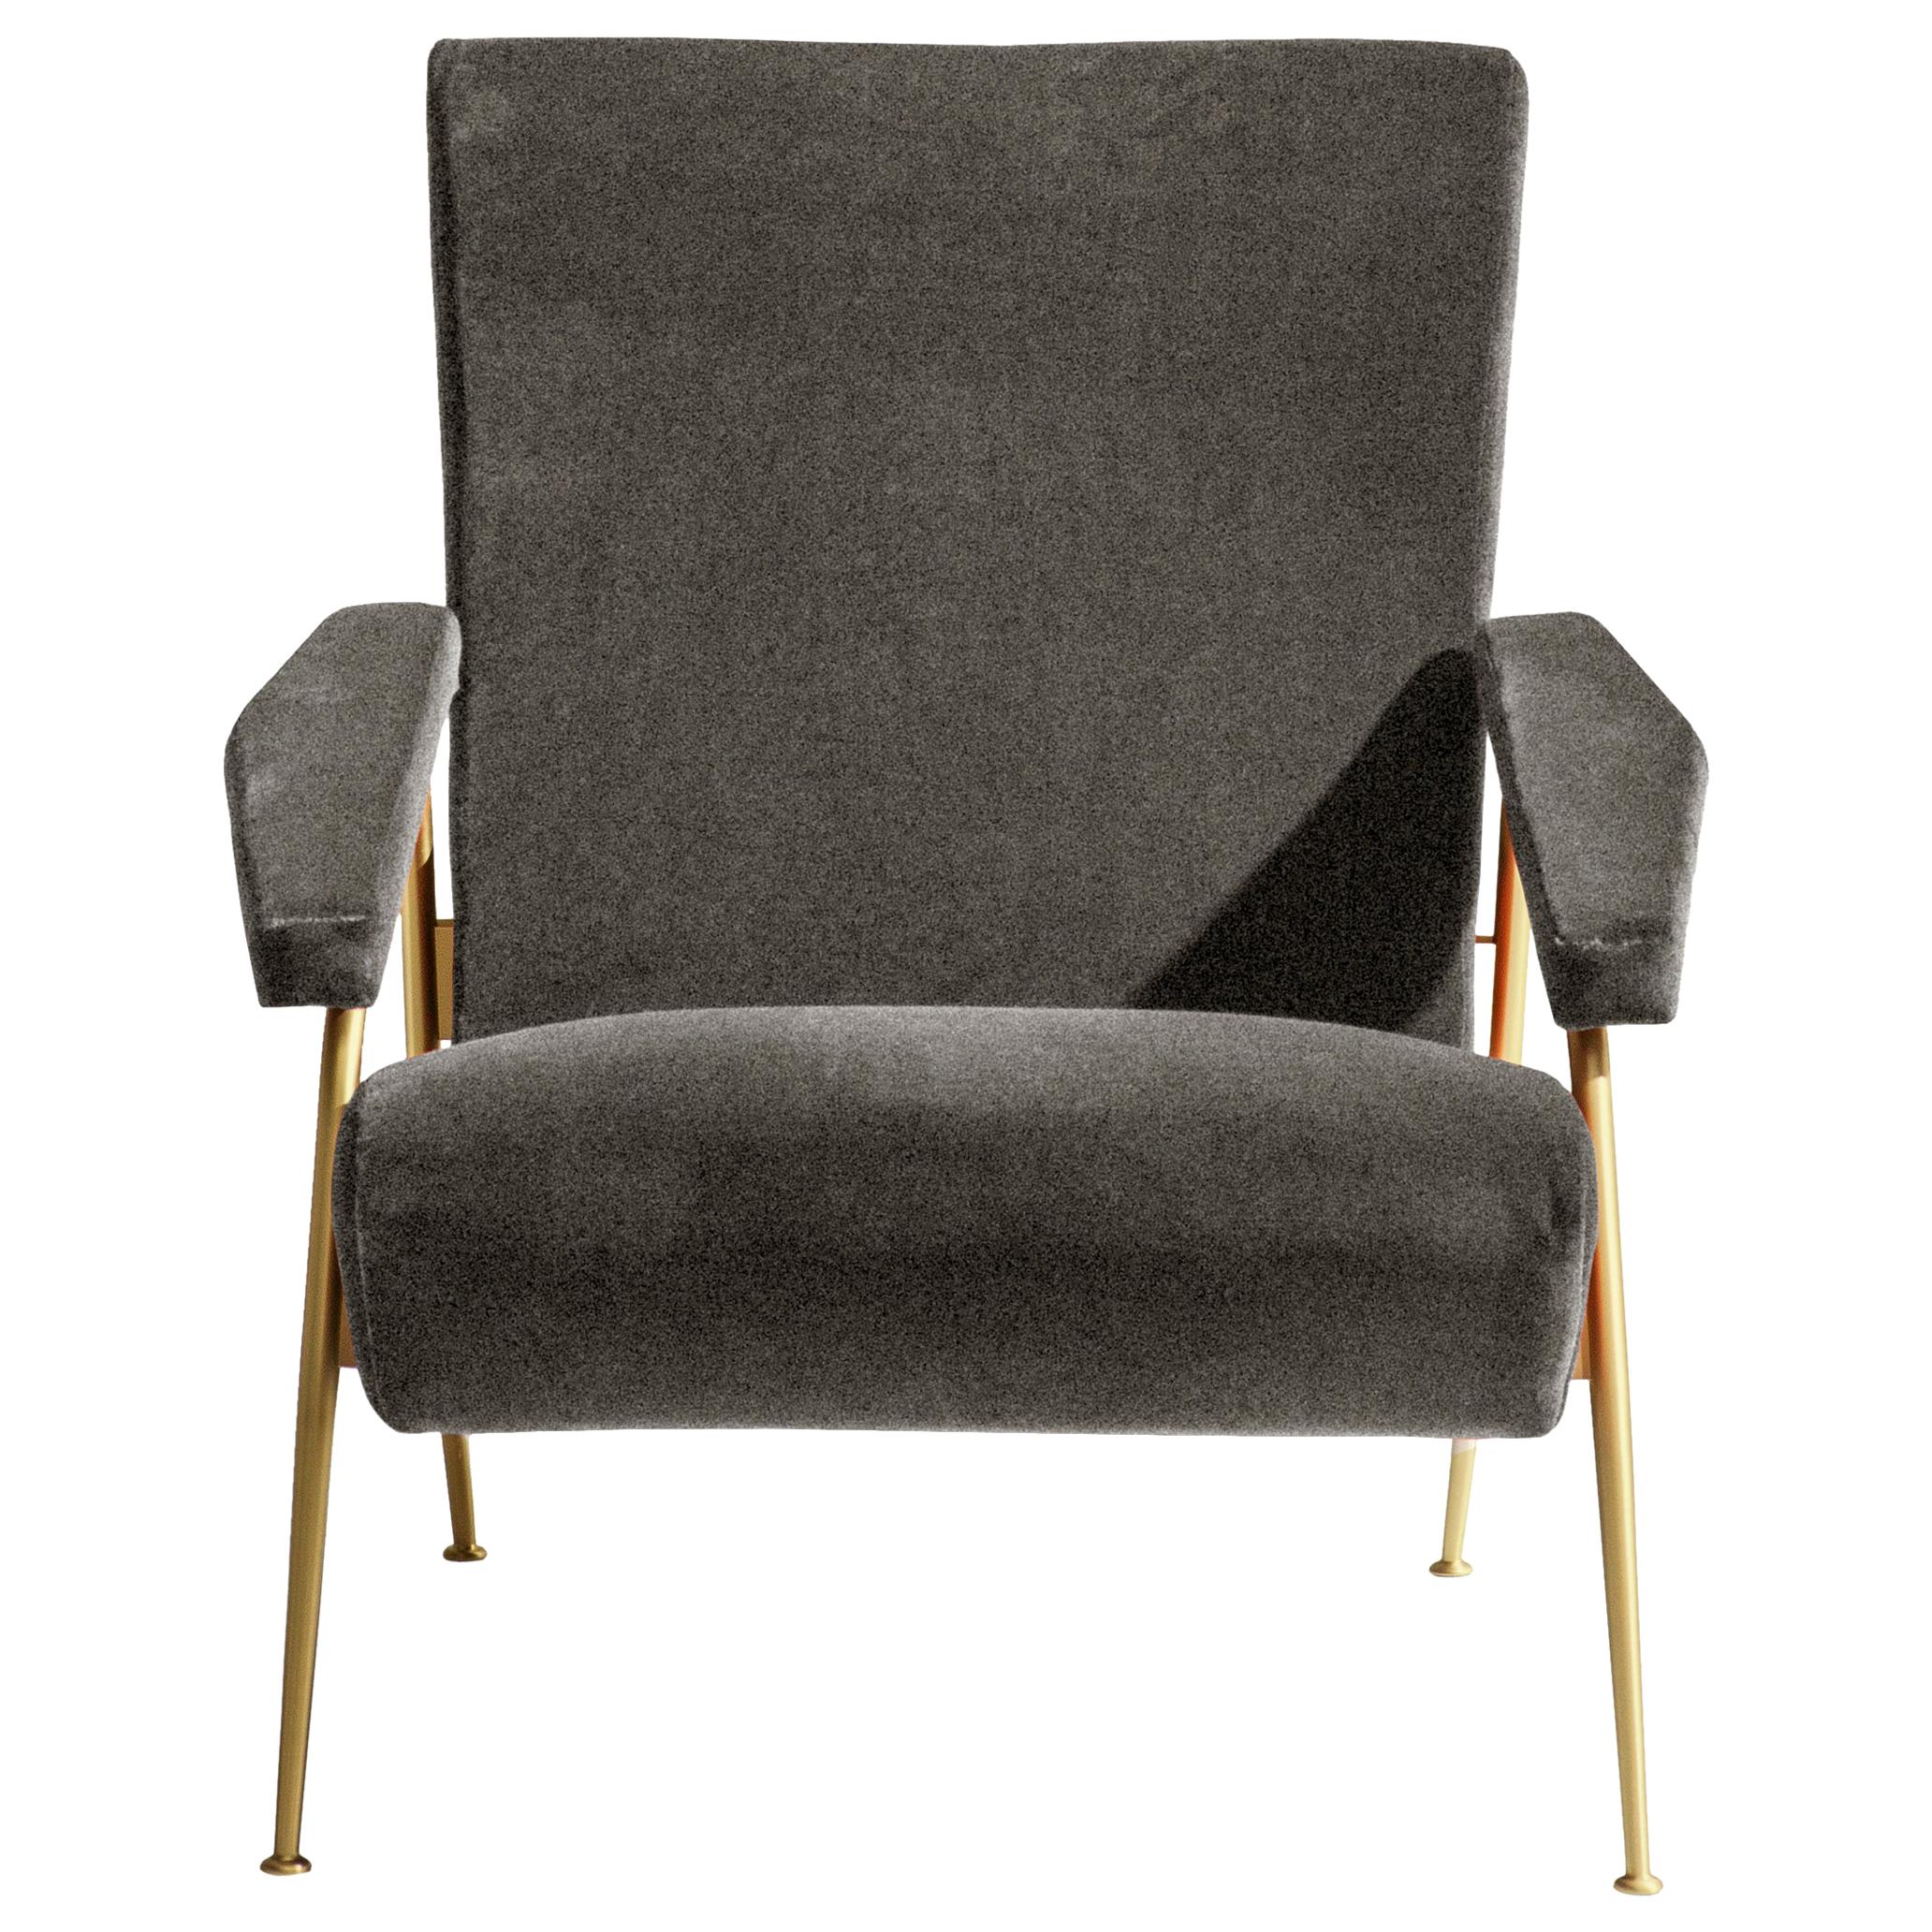 Black (WF395_Anthracite) Armchair in Chenille and Steel Molteni&C by Gio Ponti - D.153.1 - made in Italy